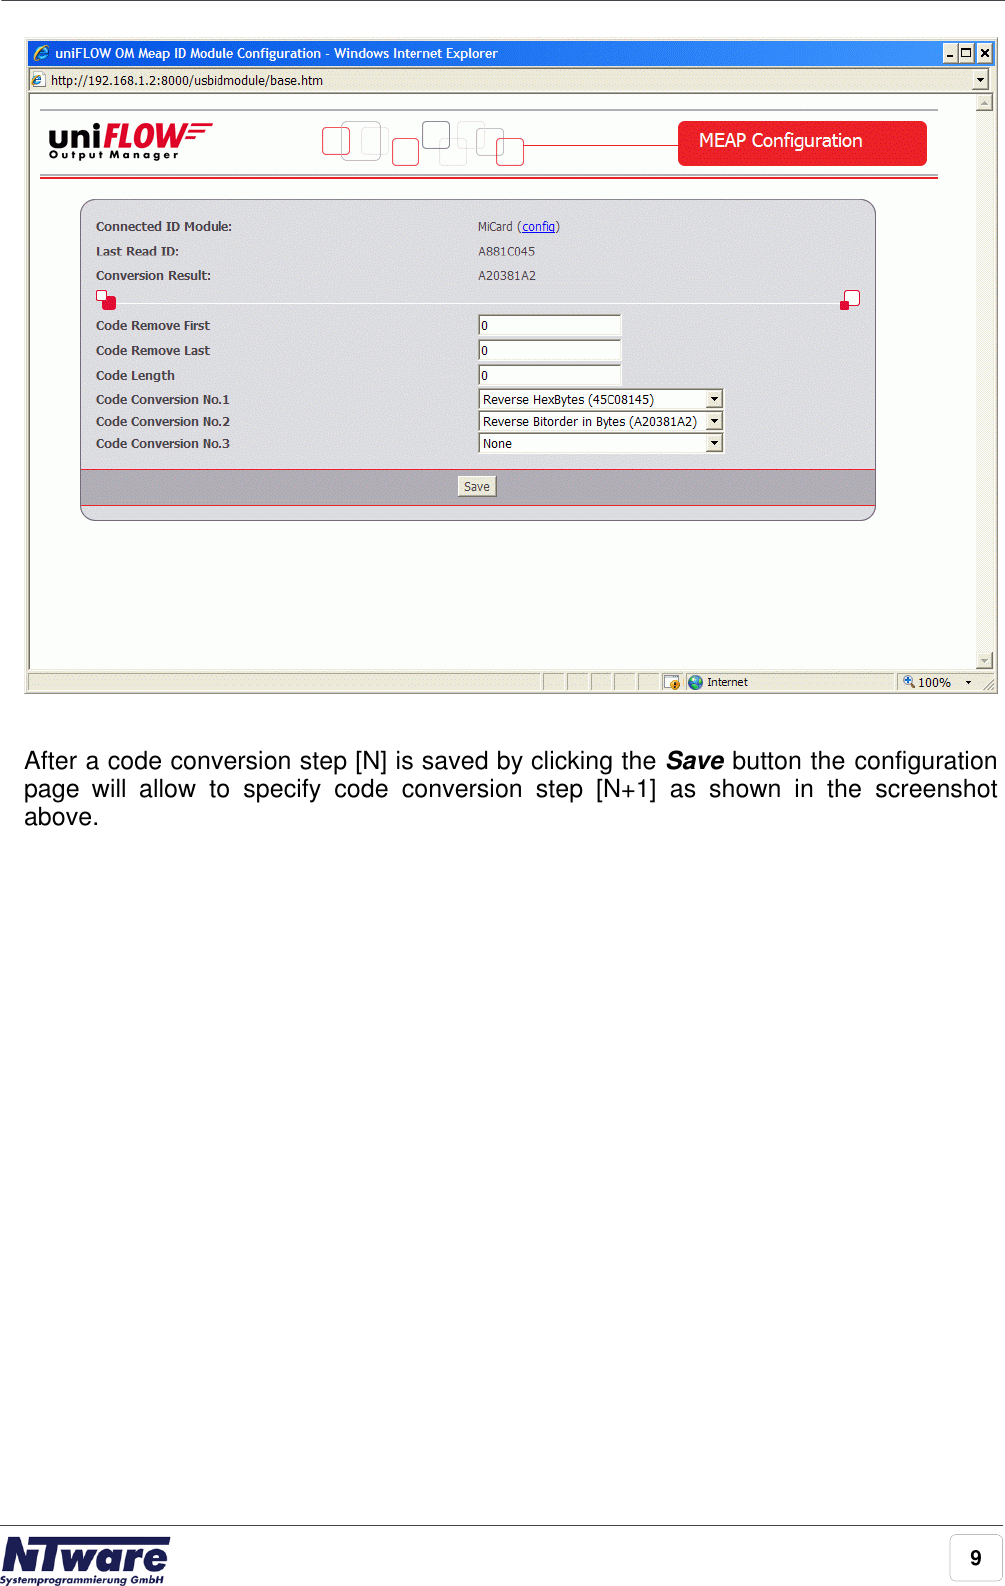 9After a code conversion step [N] is saved by clicking the Save button the configurationpage  will  allow  to  specify  code  conversion  step  [N+1]  as  shown  in  the  screenshotabove.